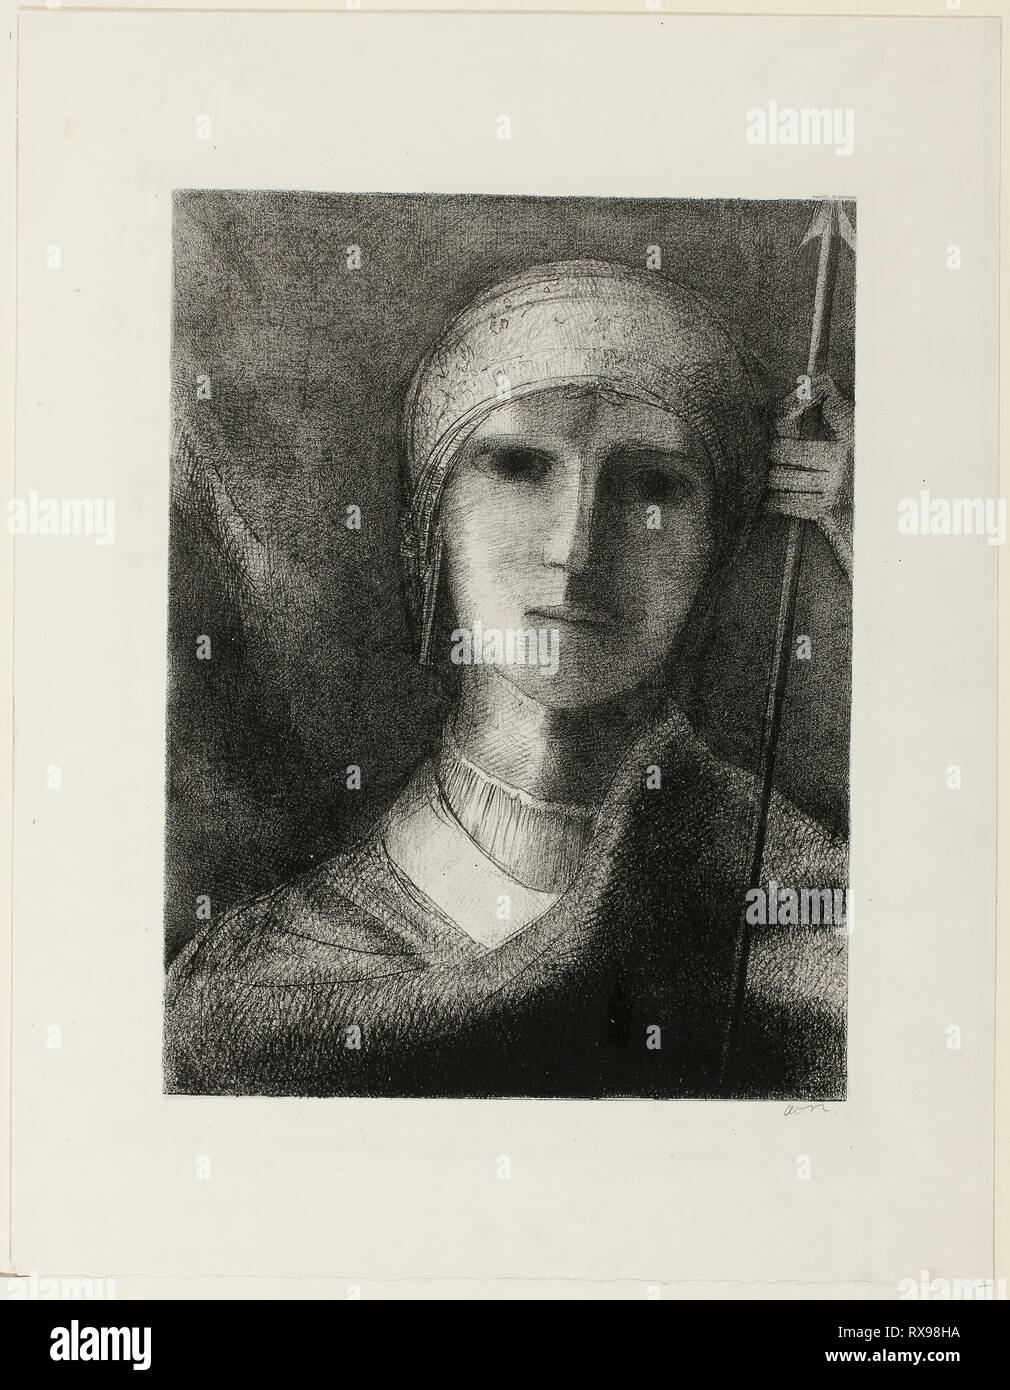 Parsifal. Odilon Redon; French, 1840-1916. Date: 1891. Dimensions: 321 × 243 mm. Transfer lithograph on mounted ivory China paper. Origin: France. Museum: The Chicago Art Institute. Stock Photo